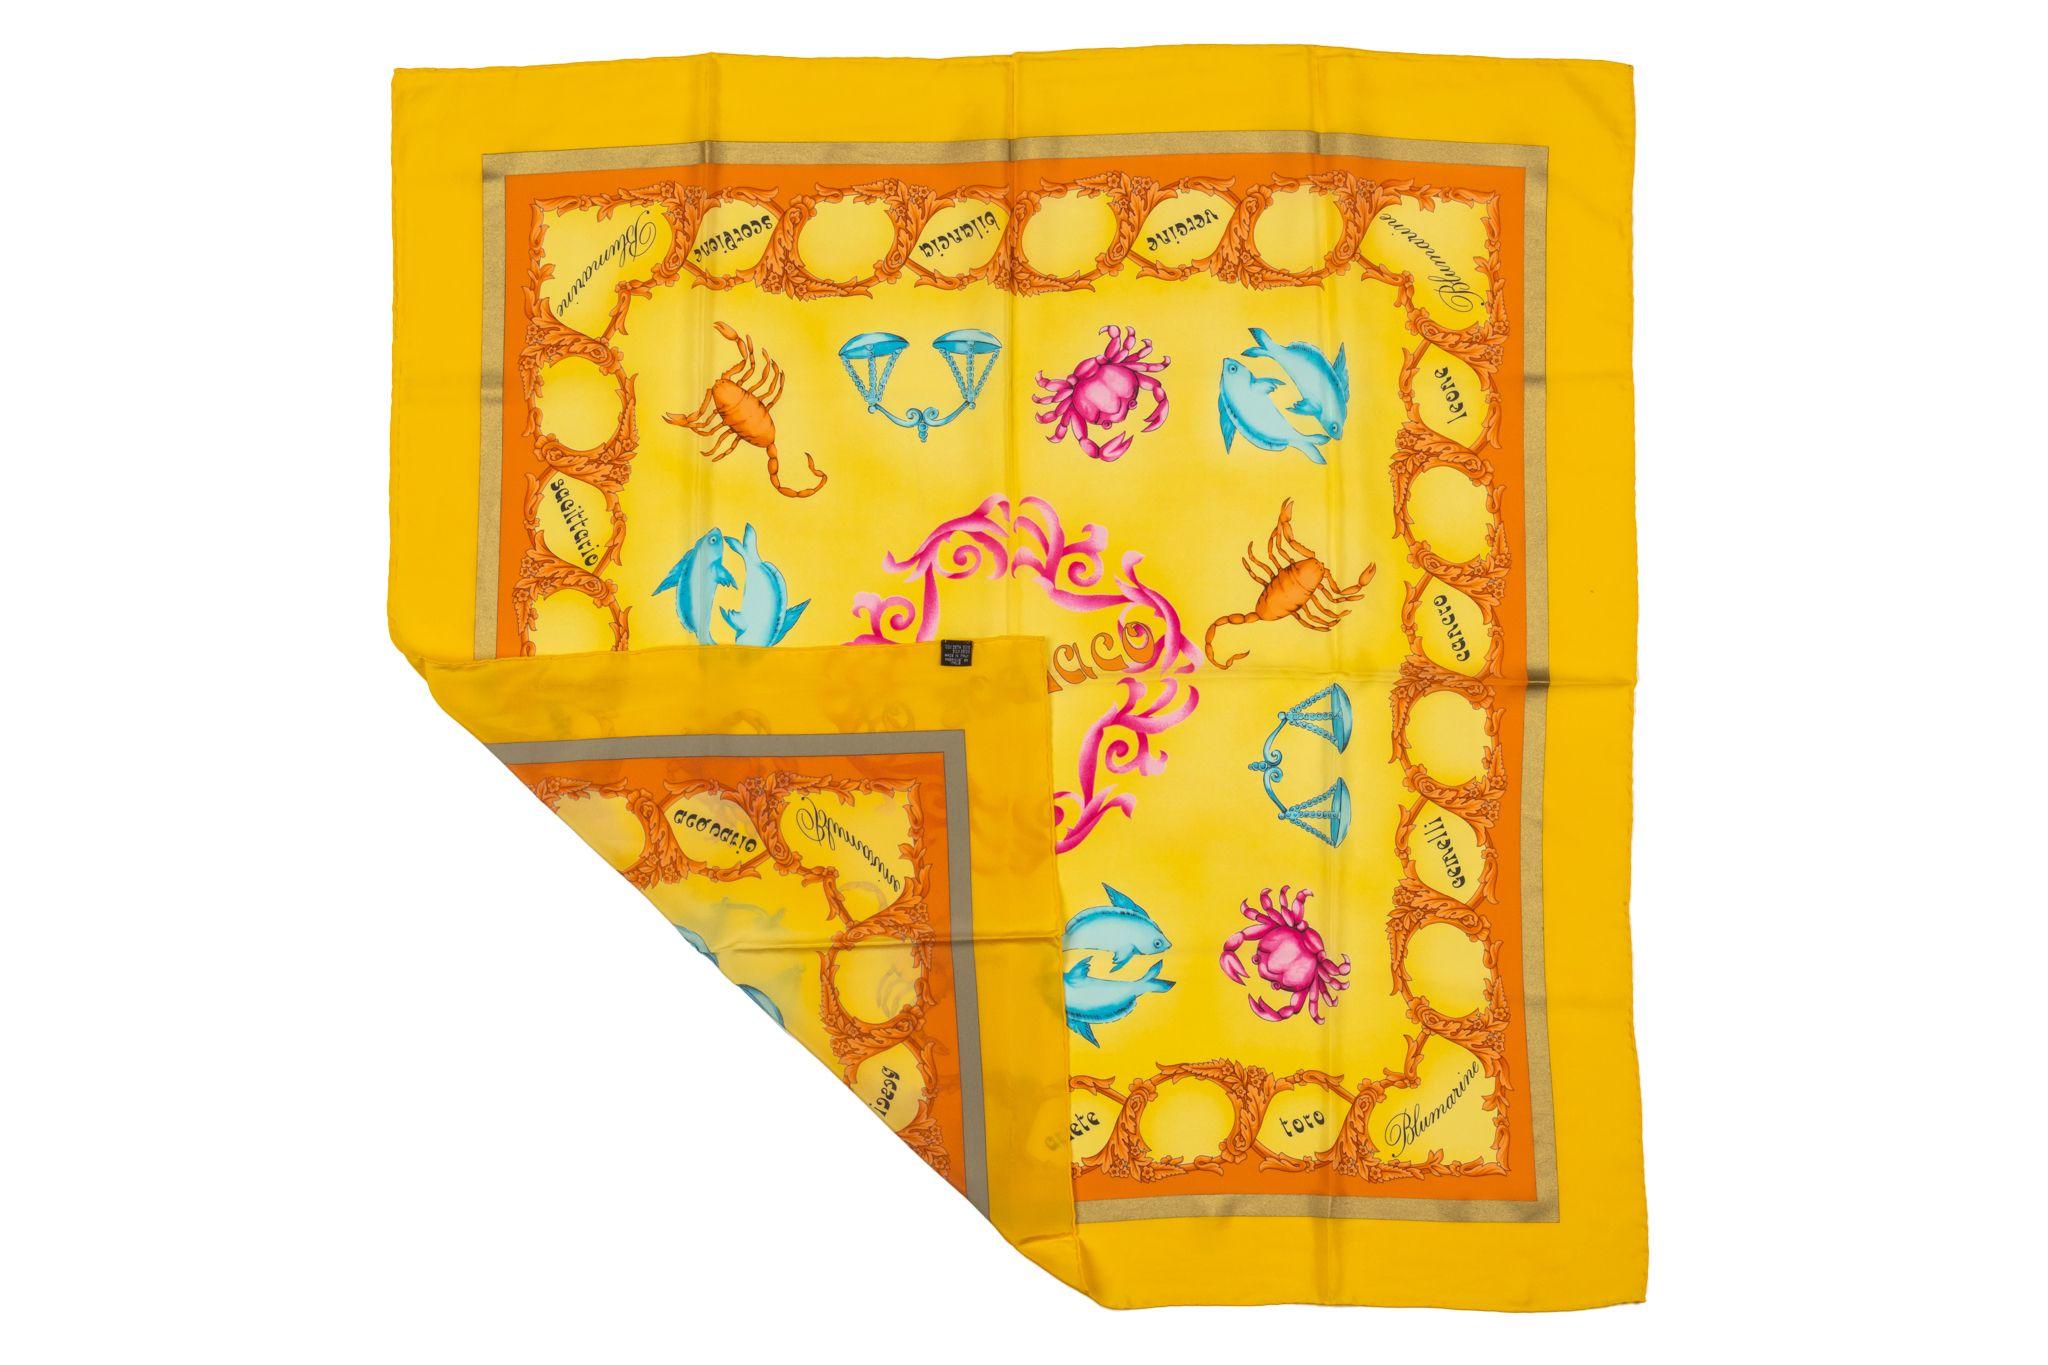 Blumarine Vintage Zodiac Silk Scarf in yellow. The pattern shows several zodiac signs. The piece has one stain please see the pictures.